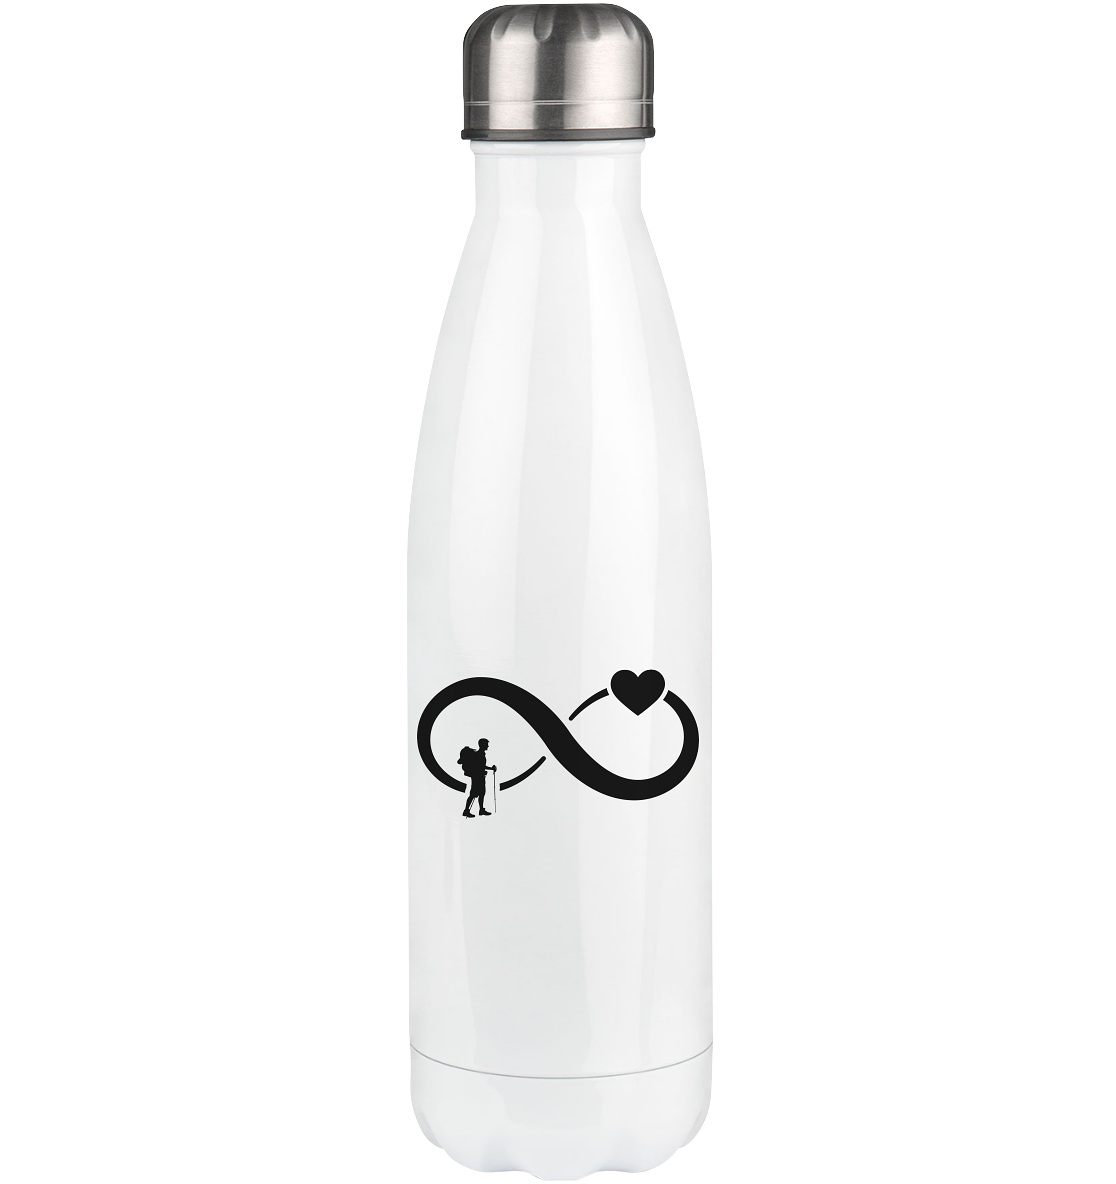 Infinity Heart and Hiking - Edelstahl Thermosflasche wandern 500ml